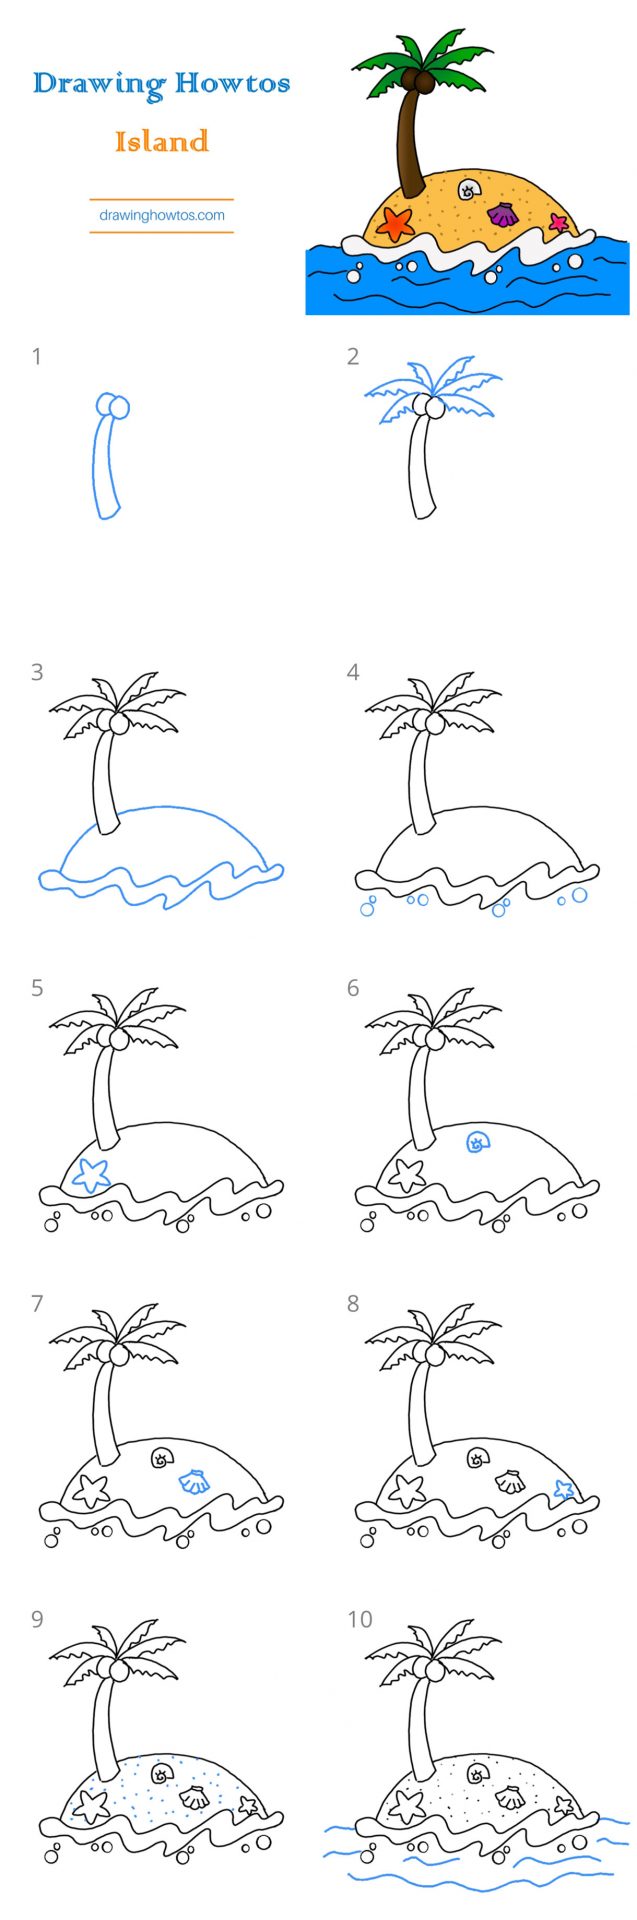 How to Draw an Island Step by Step